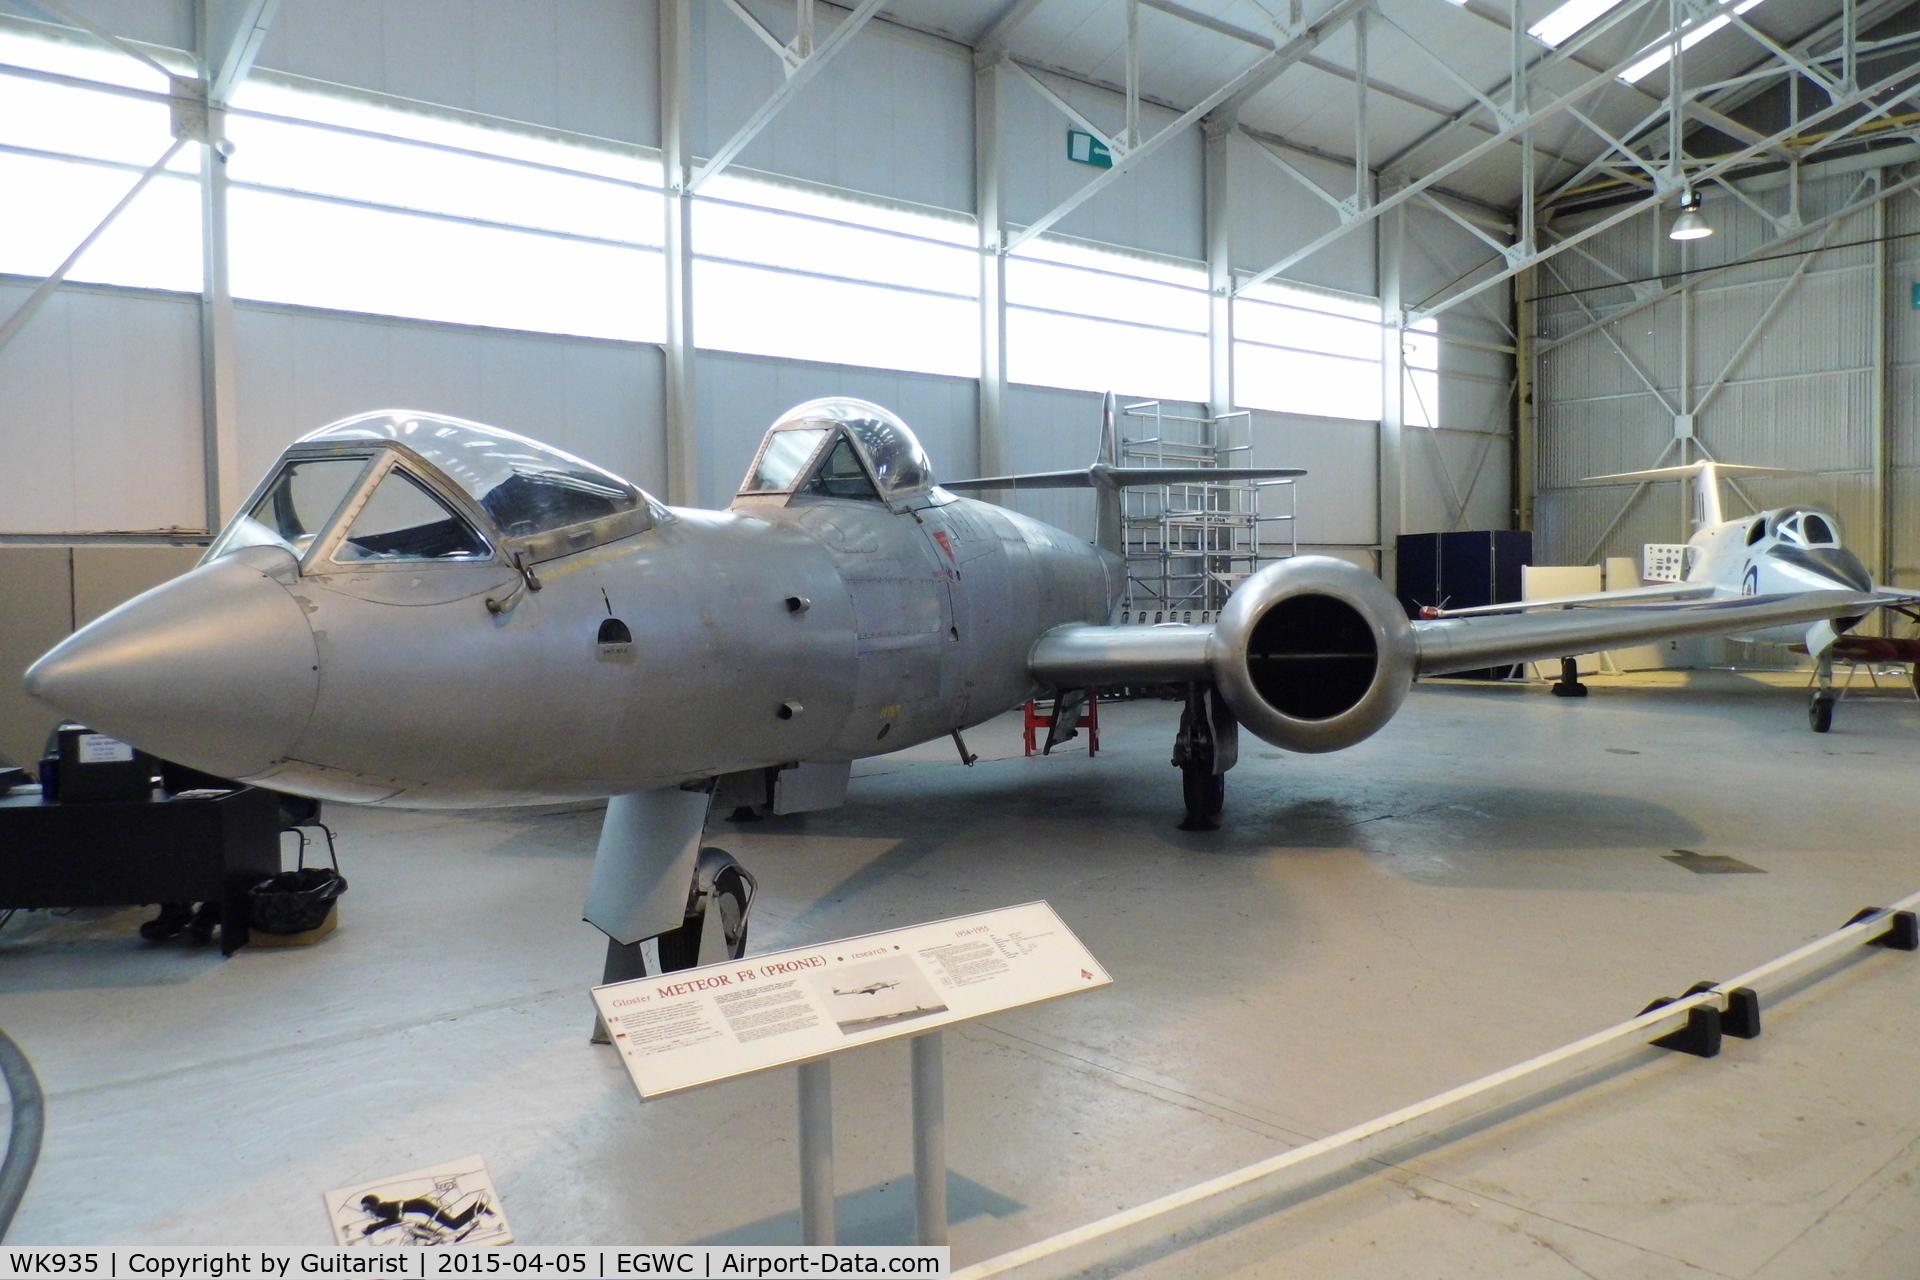 WK935, Gloster Meteor F.8(Mod) C/N Not found WK935, Cosford Air Museum